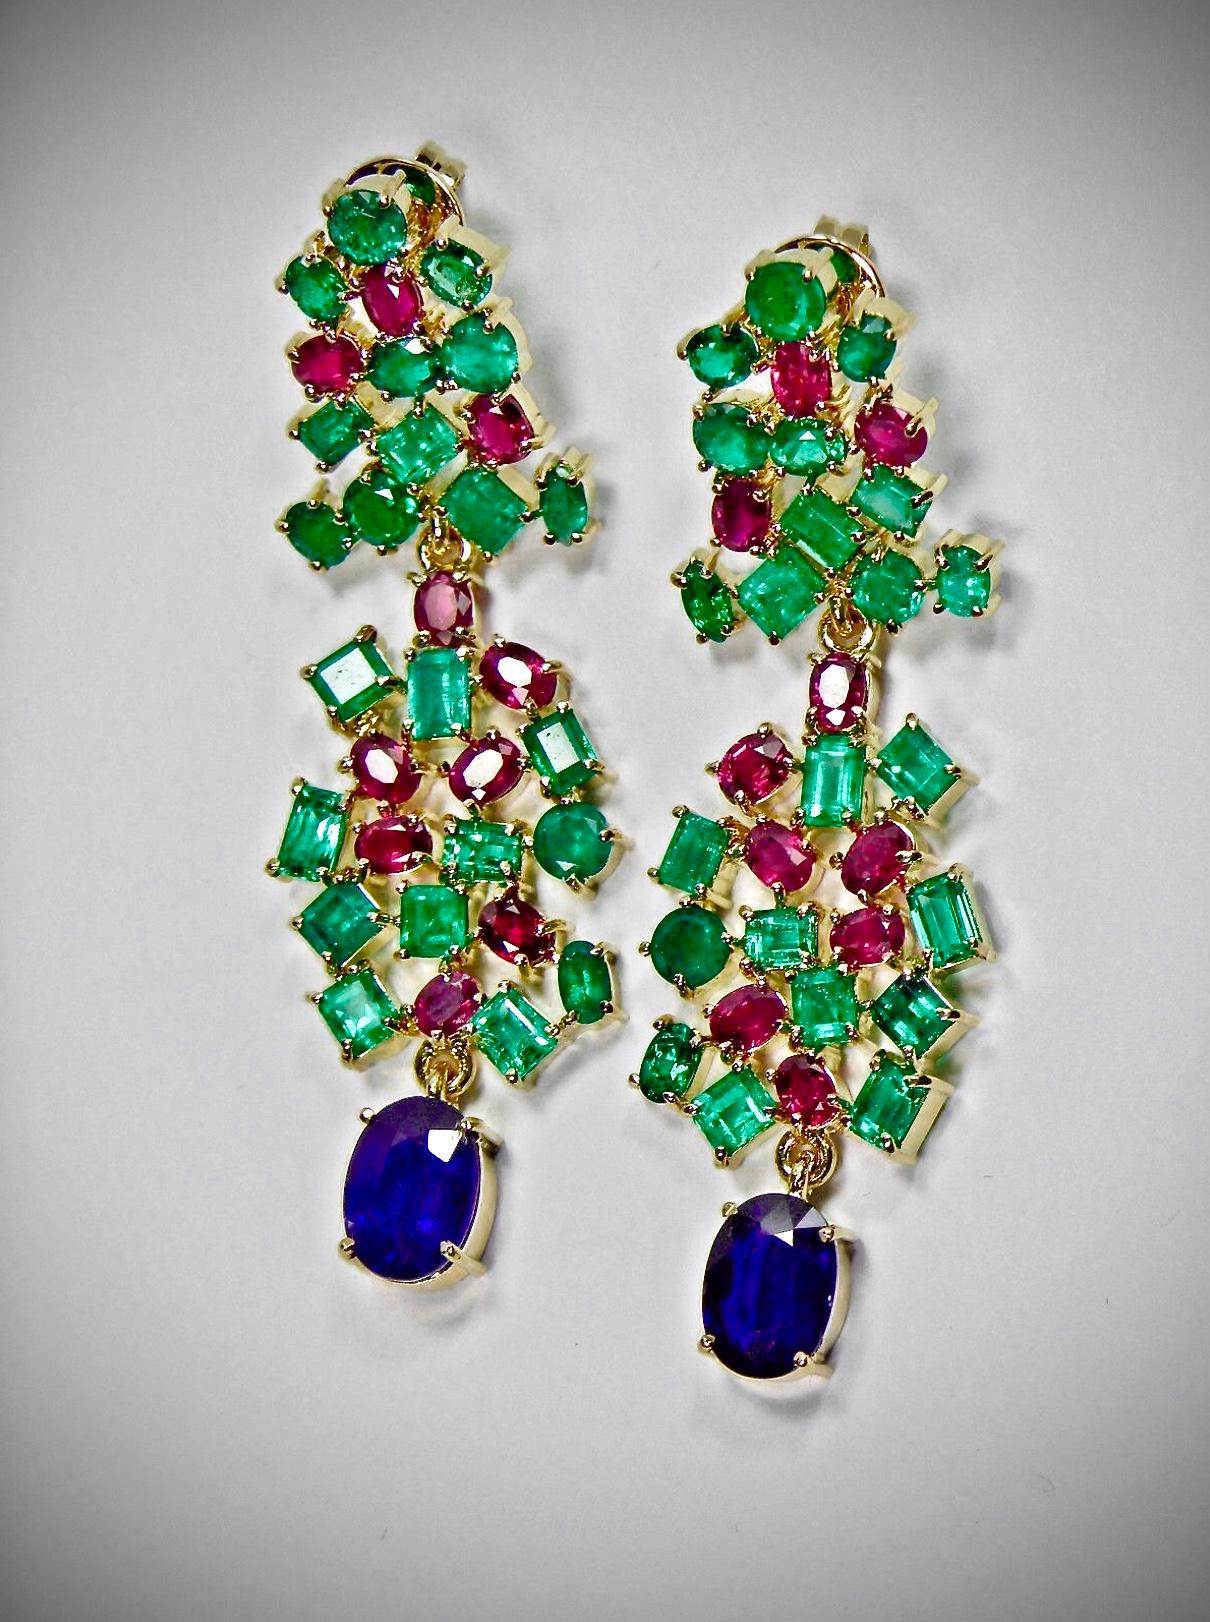  19.36 Carat Sapphire, Emerald, Ruby Chandeliers Earrings One of a Kind  For Sale 2